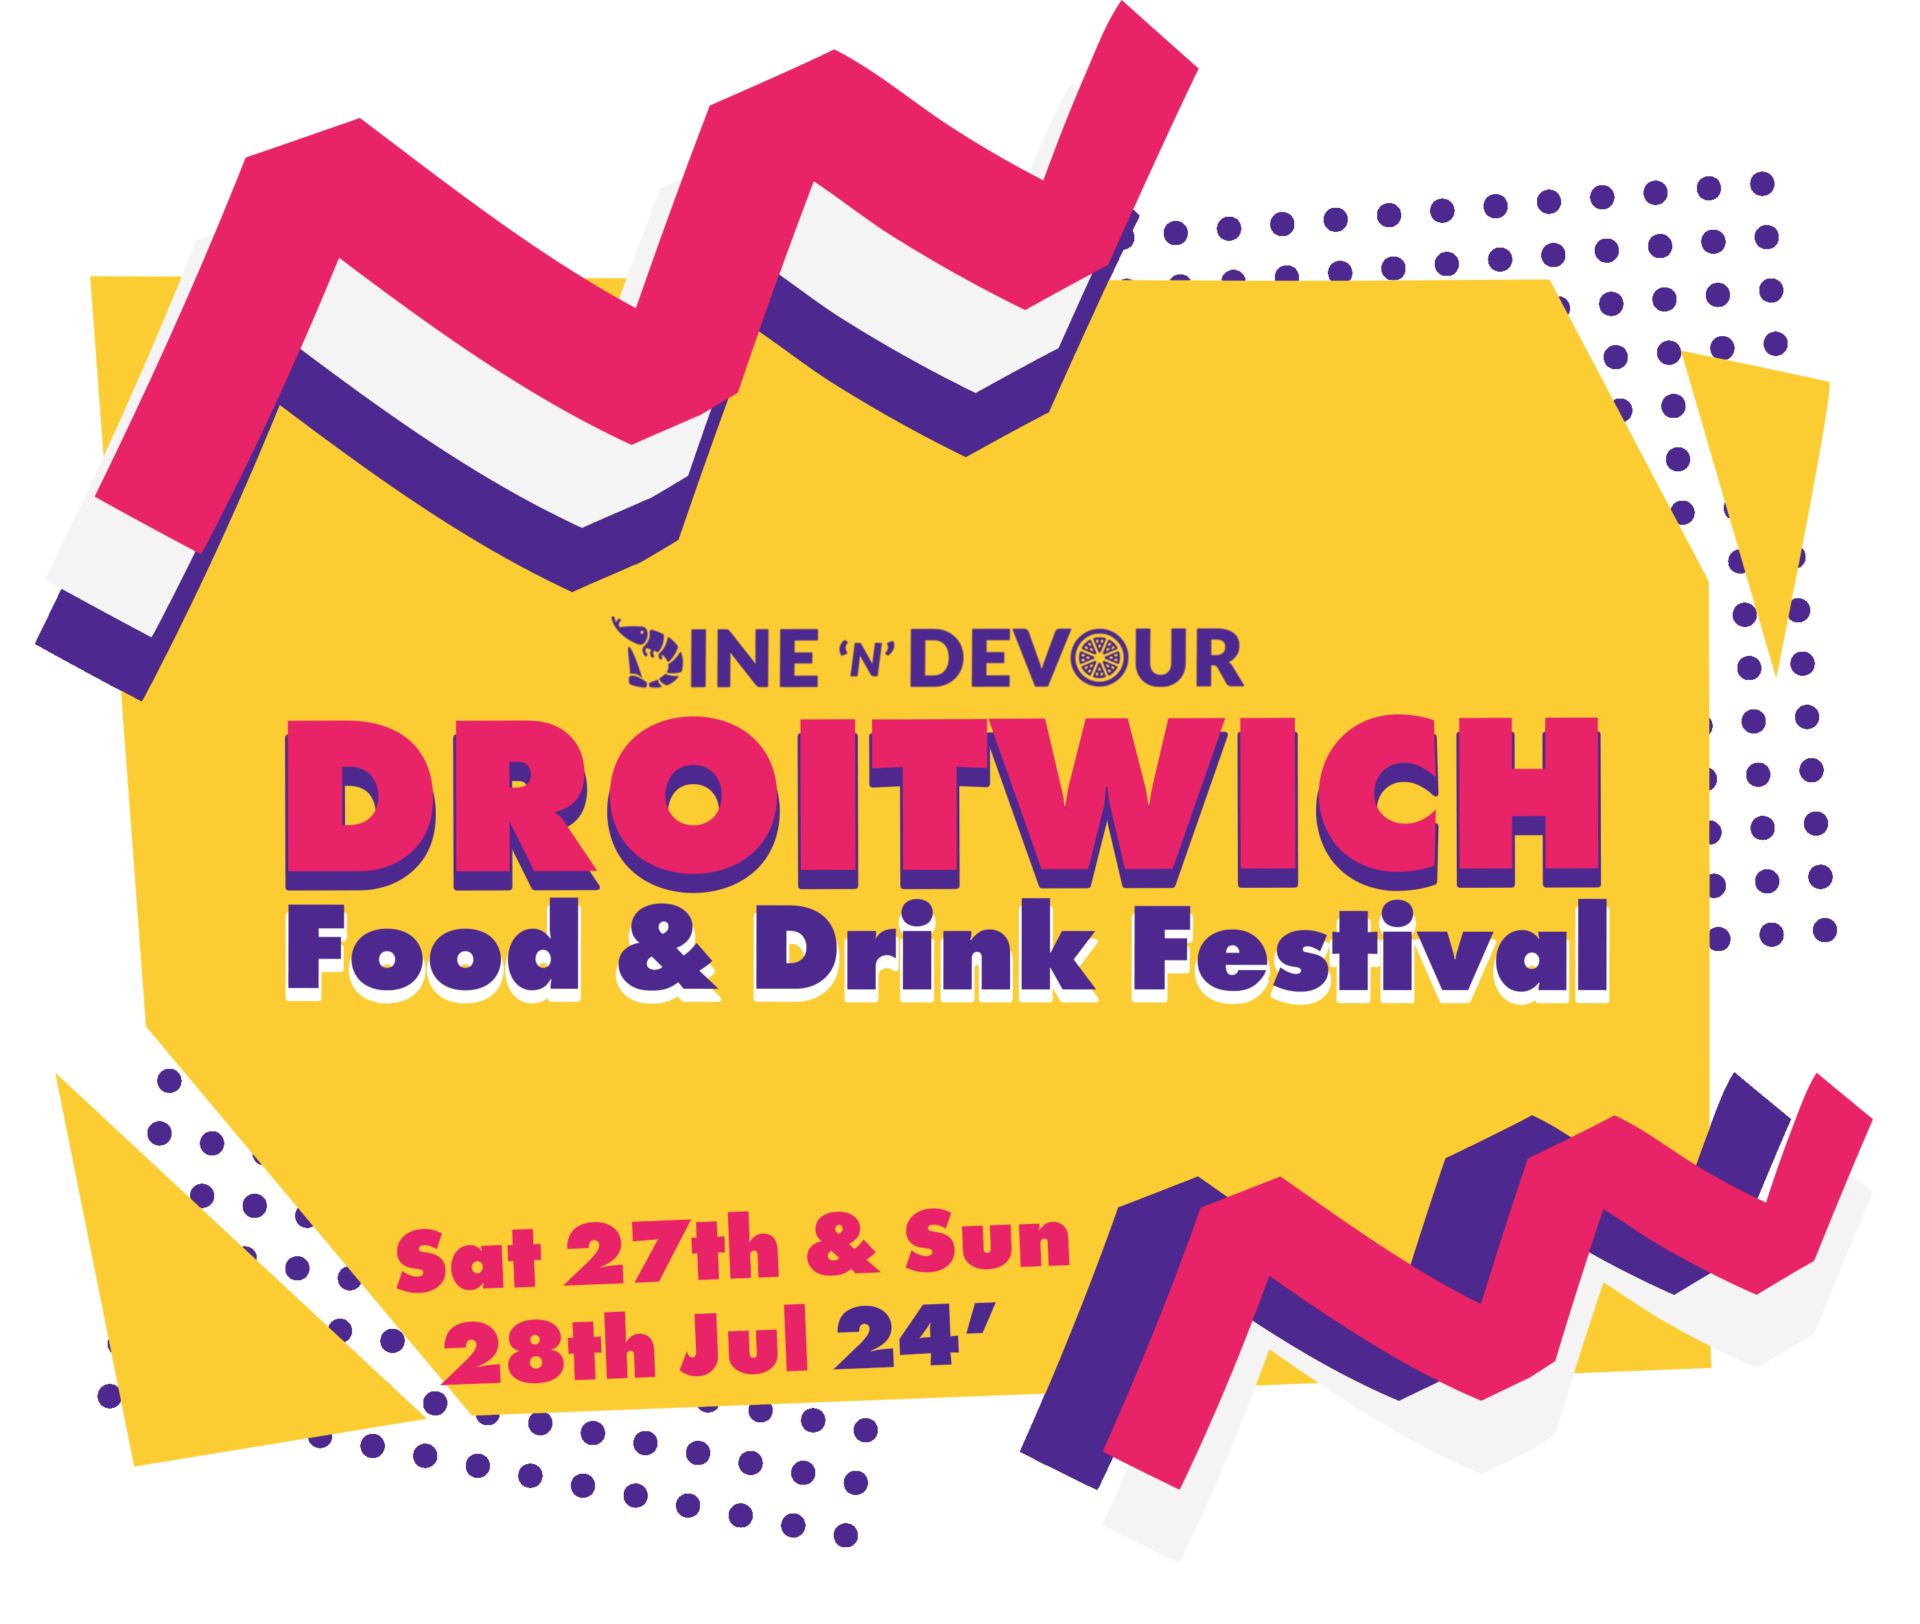 Dine ‘N’ Devour Food and Artisan Festival Droitwich